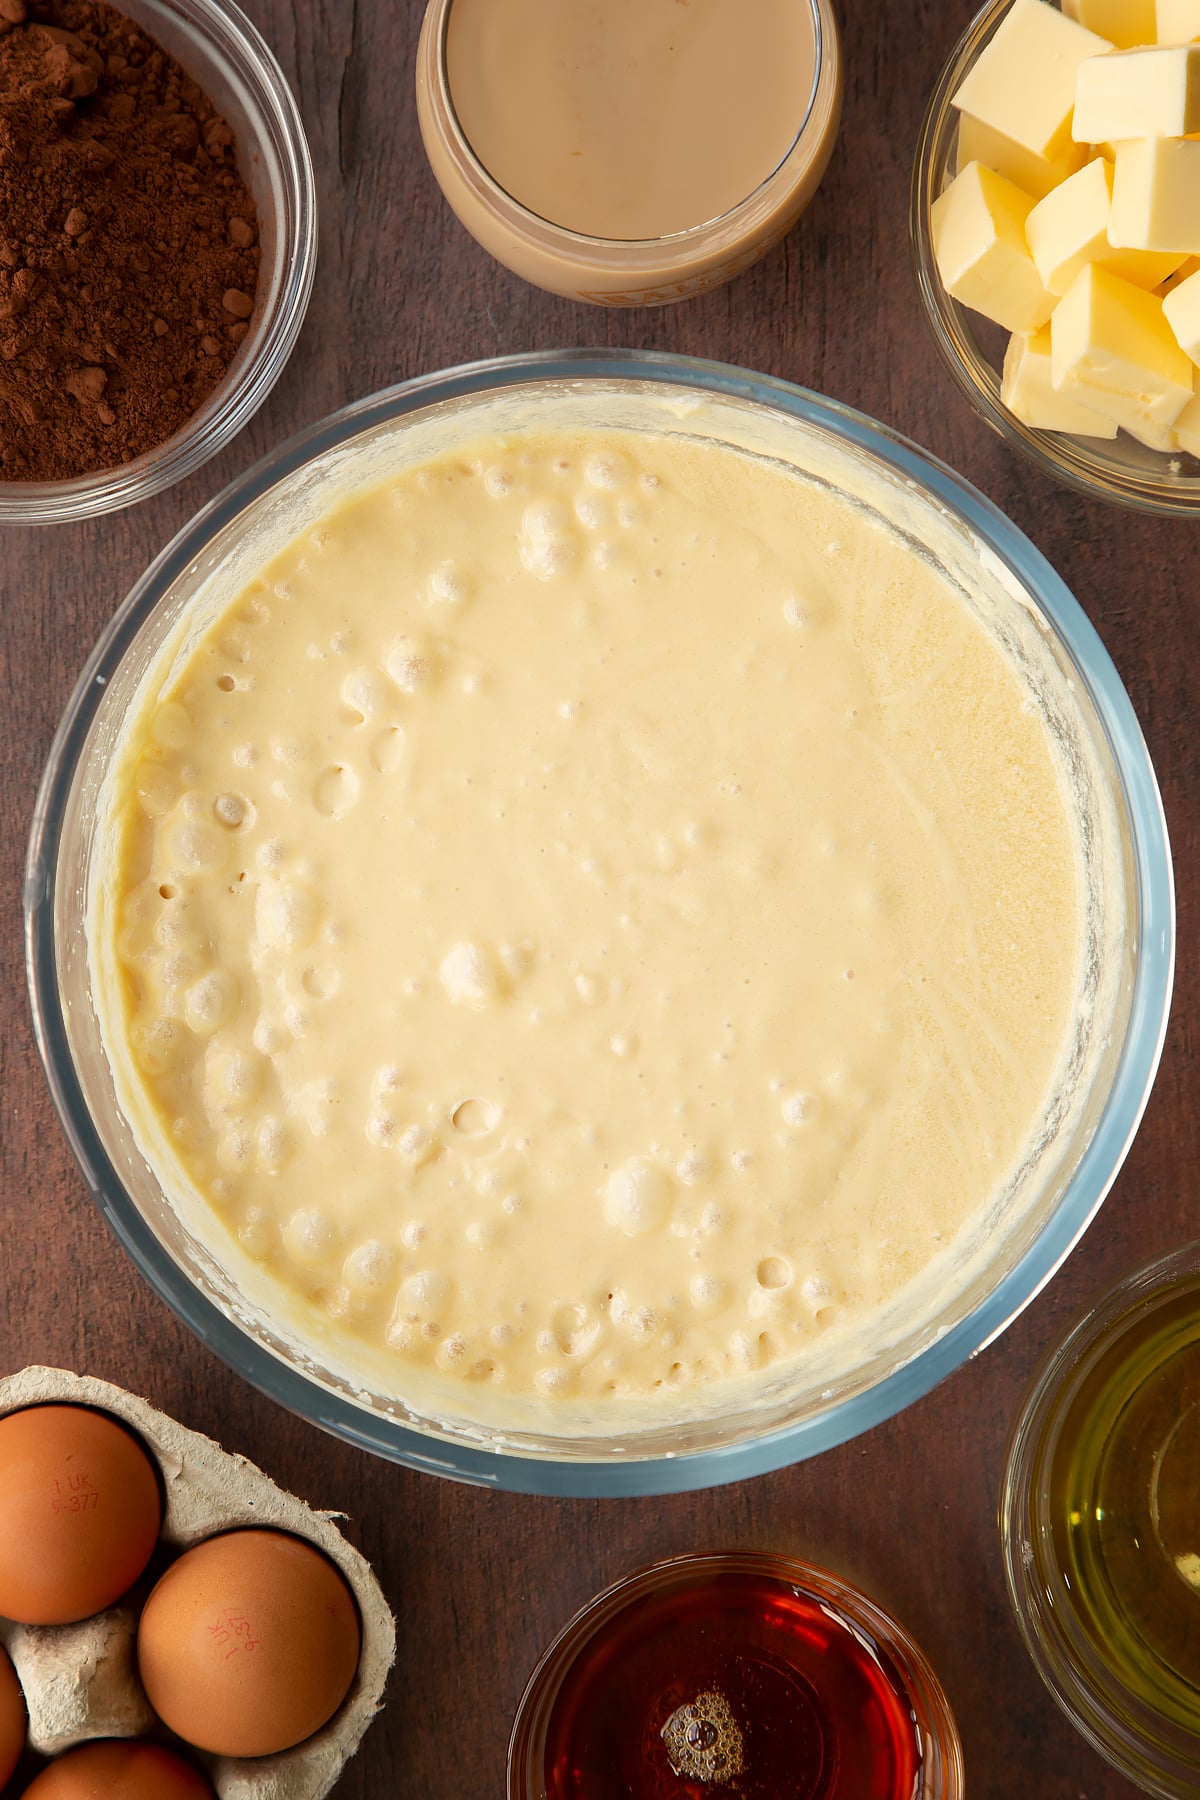 Butter, vegetable oil, caster sugar, golden syrup, egg and Baileys, whisked together in a glass mixing bowl. Ingredients to make a Baileys cake surround the bowl.